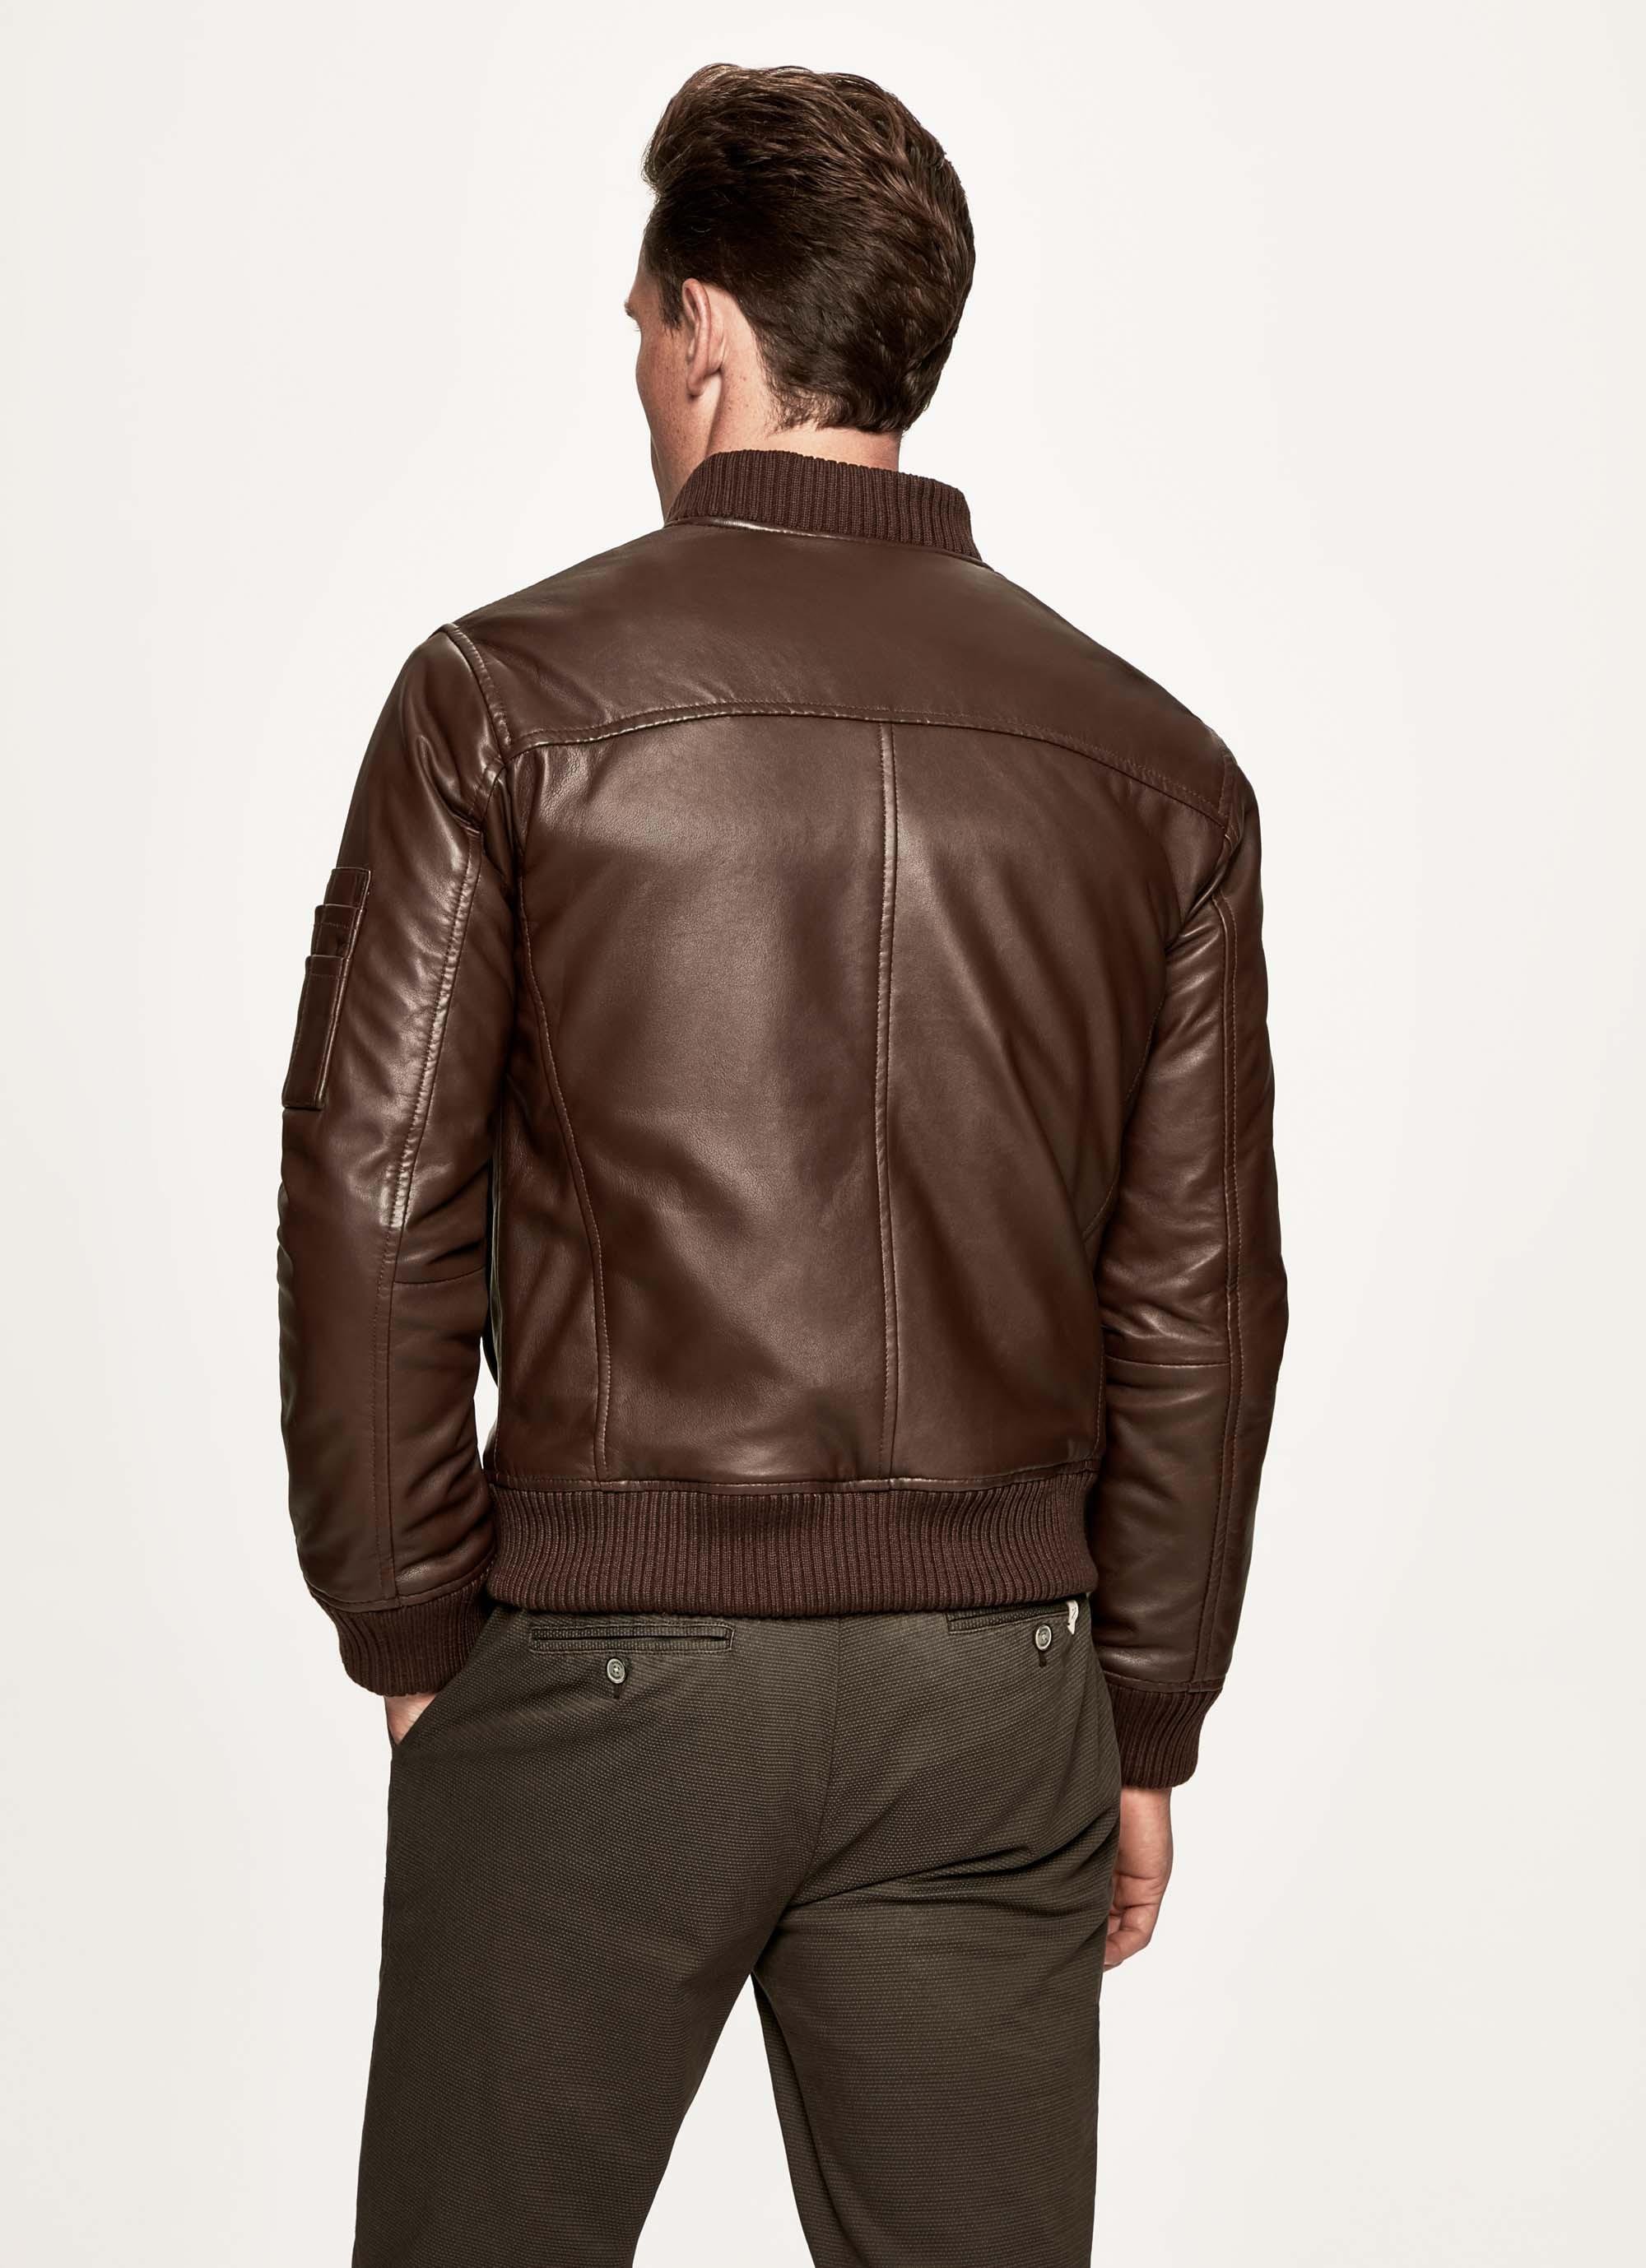 Hackett Leather Nappa Bomber Jacket in Brown for Men - Lyst